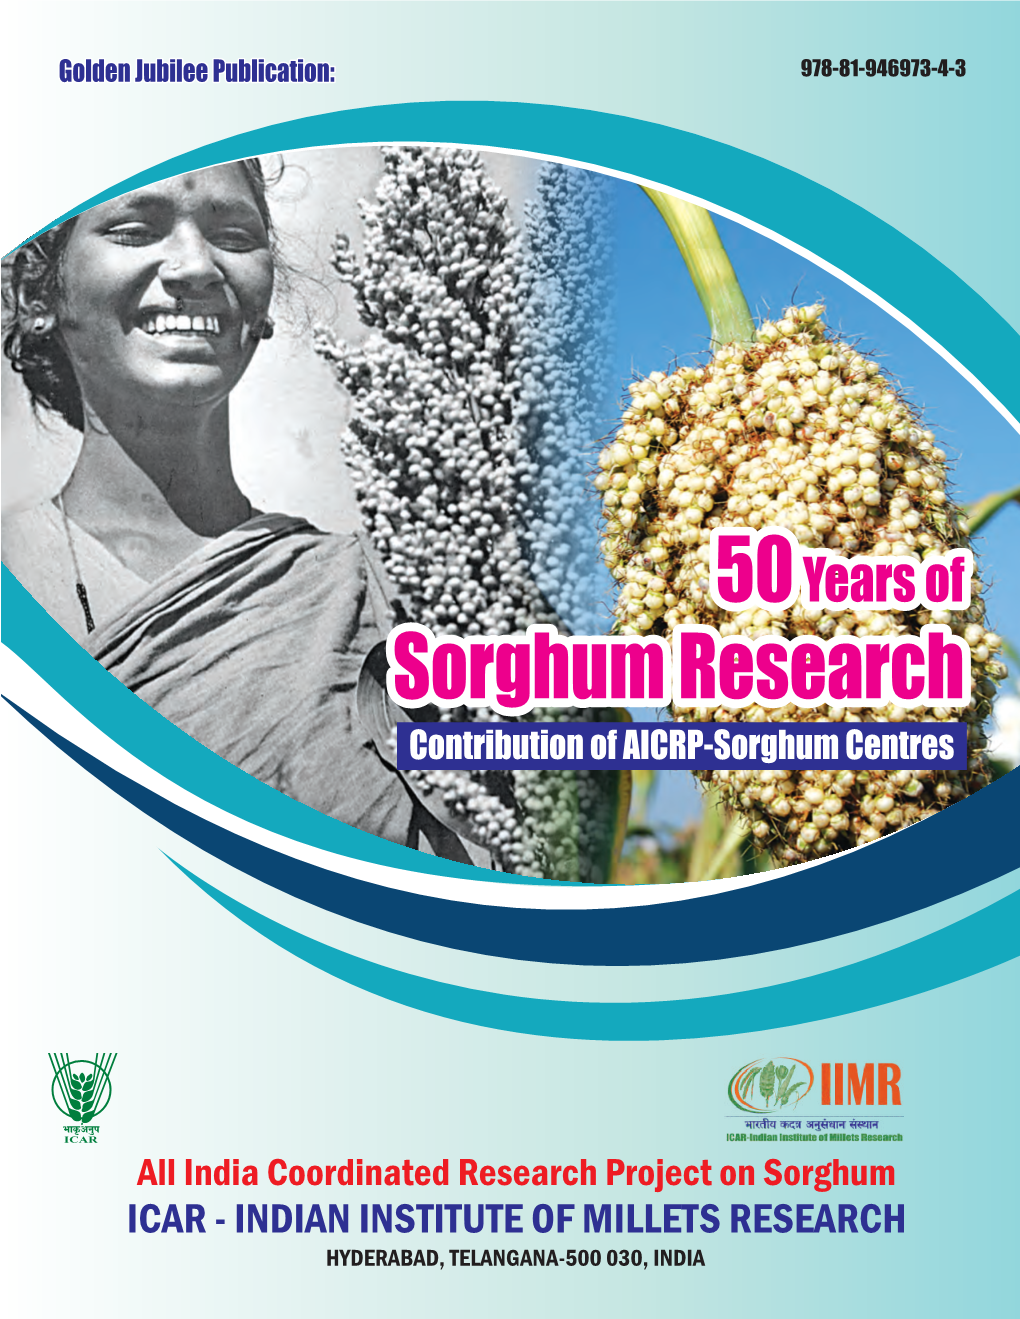 50 Years of Sorghum Research Contribution of AICRP-Sorghum Centres